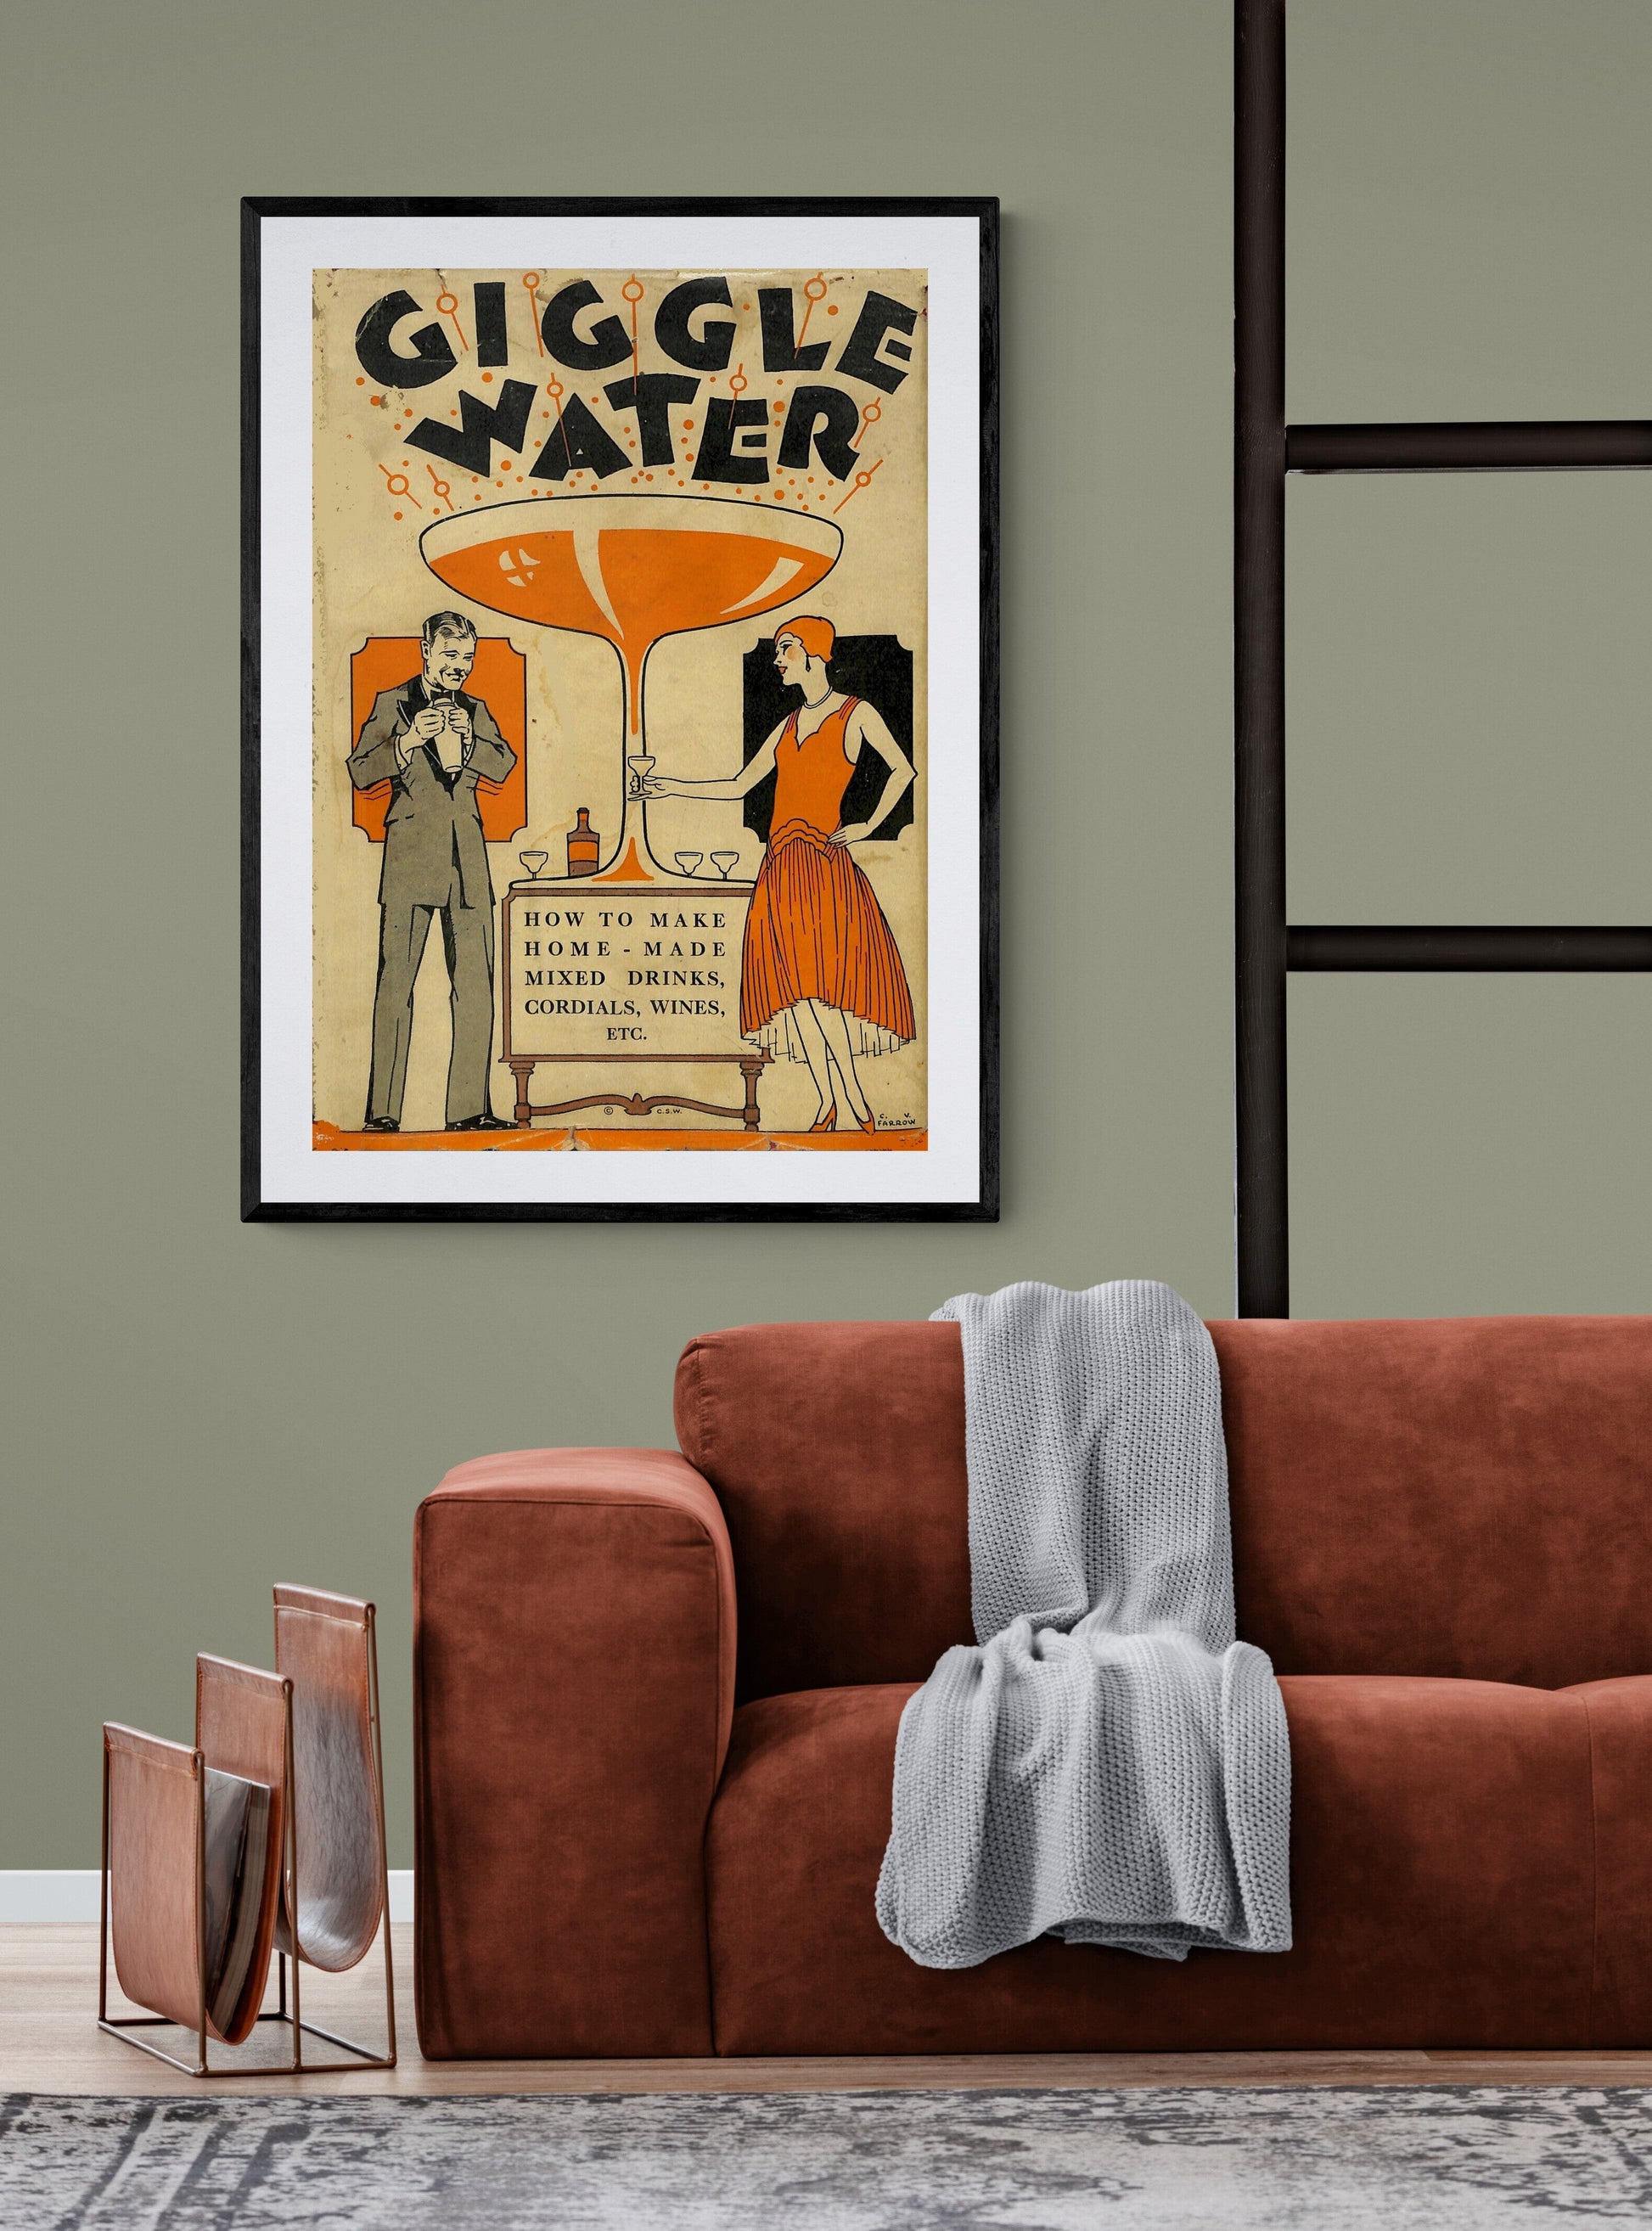 Giggle Water Cocktail Book Cover poster 1920s | Vintage cocktail posters Posters, Prints, & Visual Artwork The Trumpet Shop   